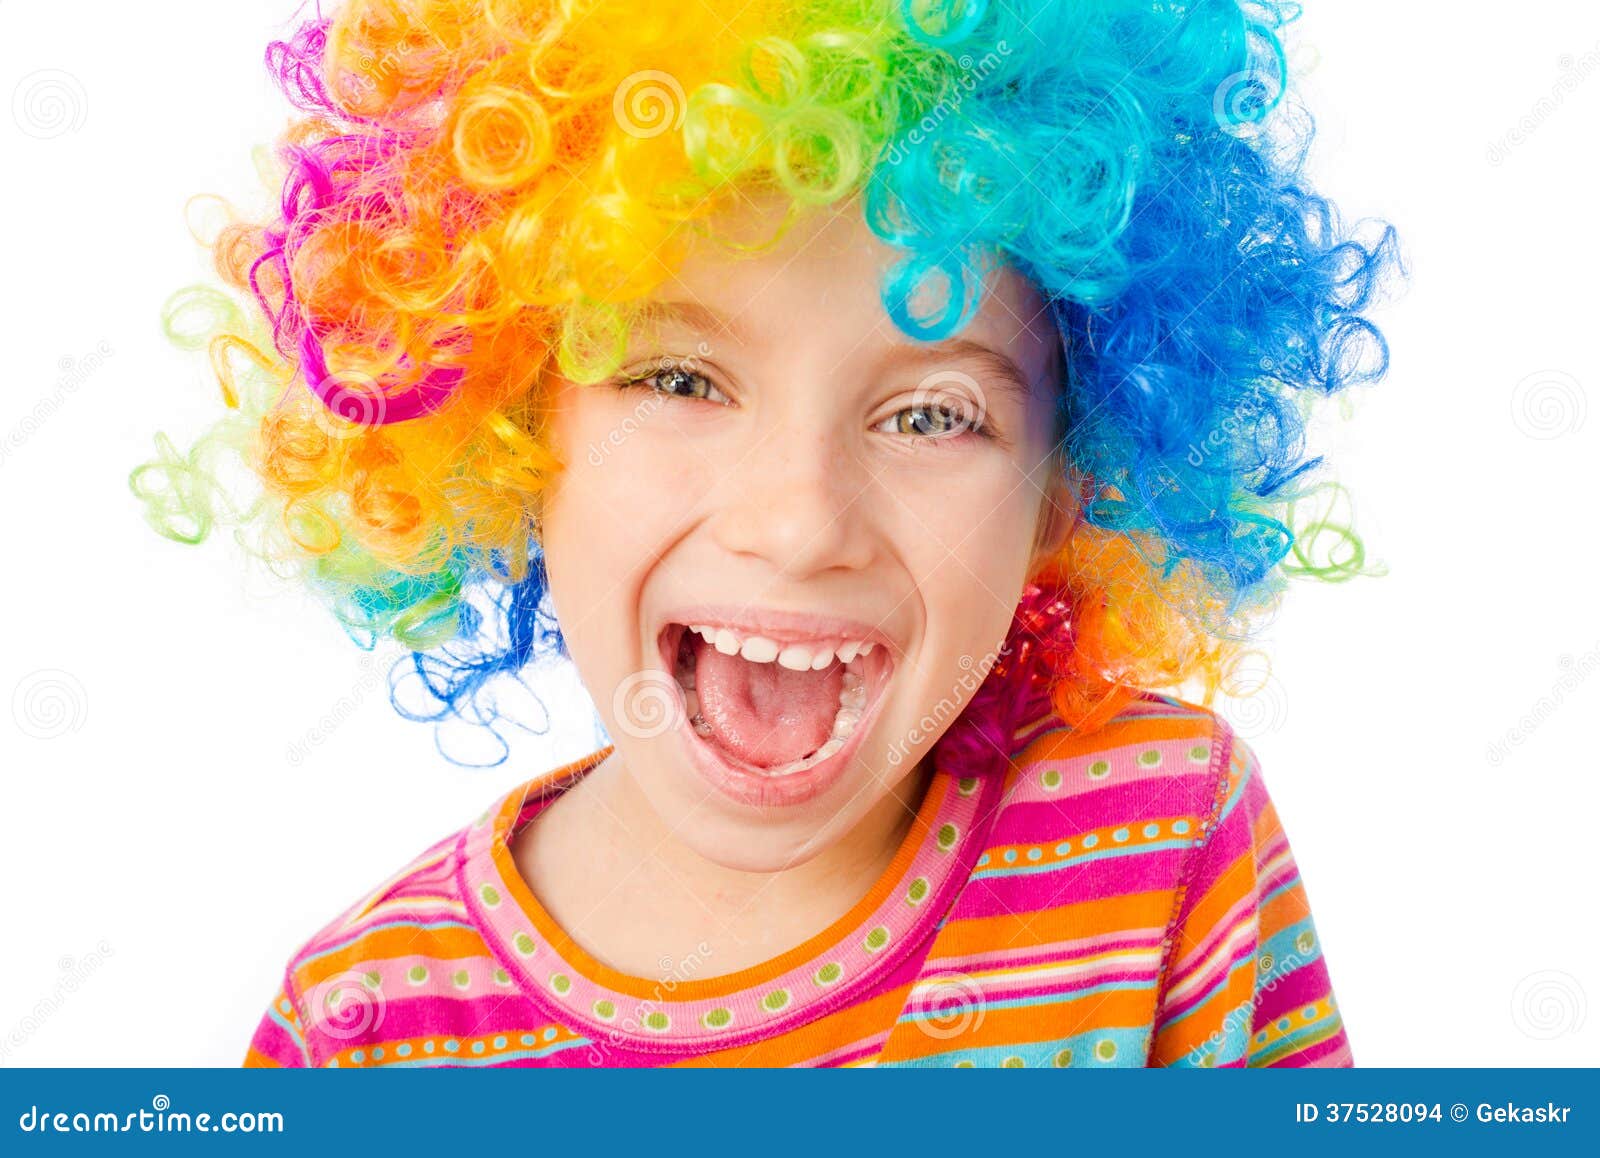 Little girl in clown wig stock photo. Image of birthday - 37528094